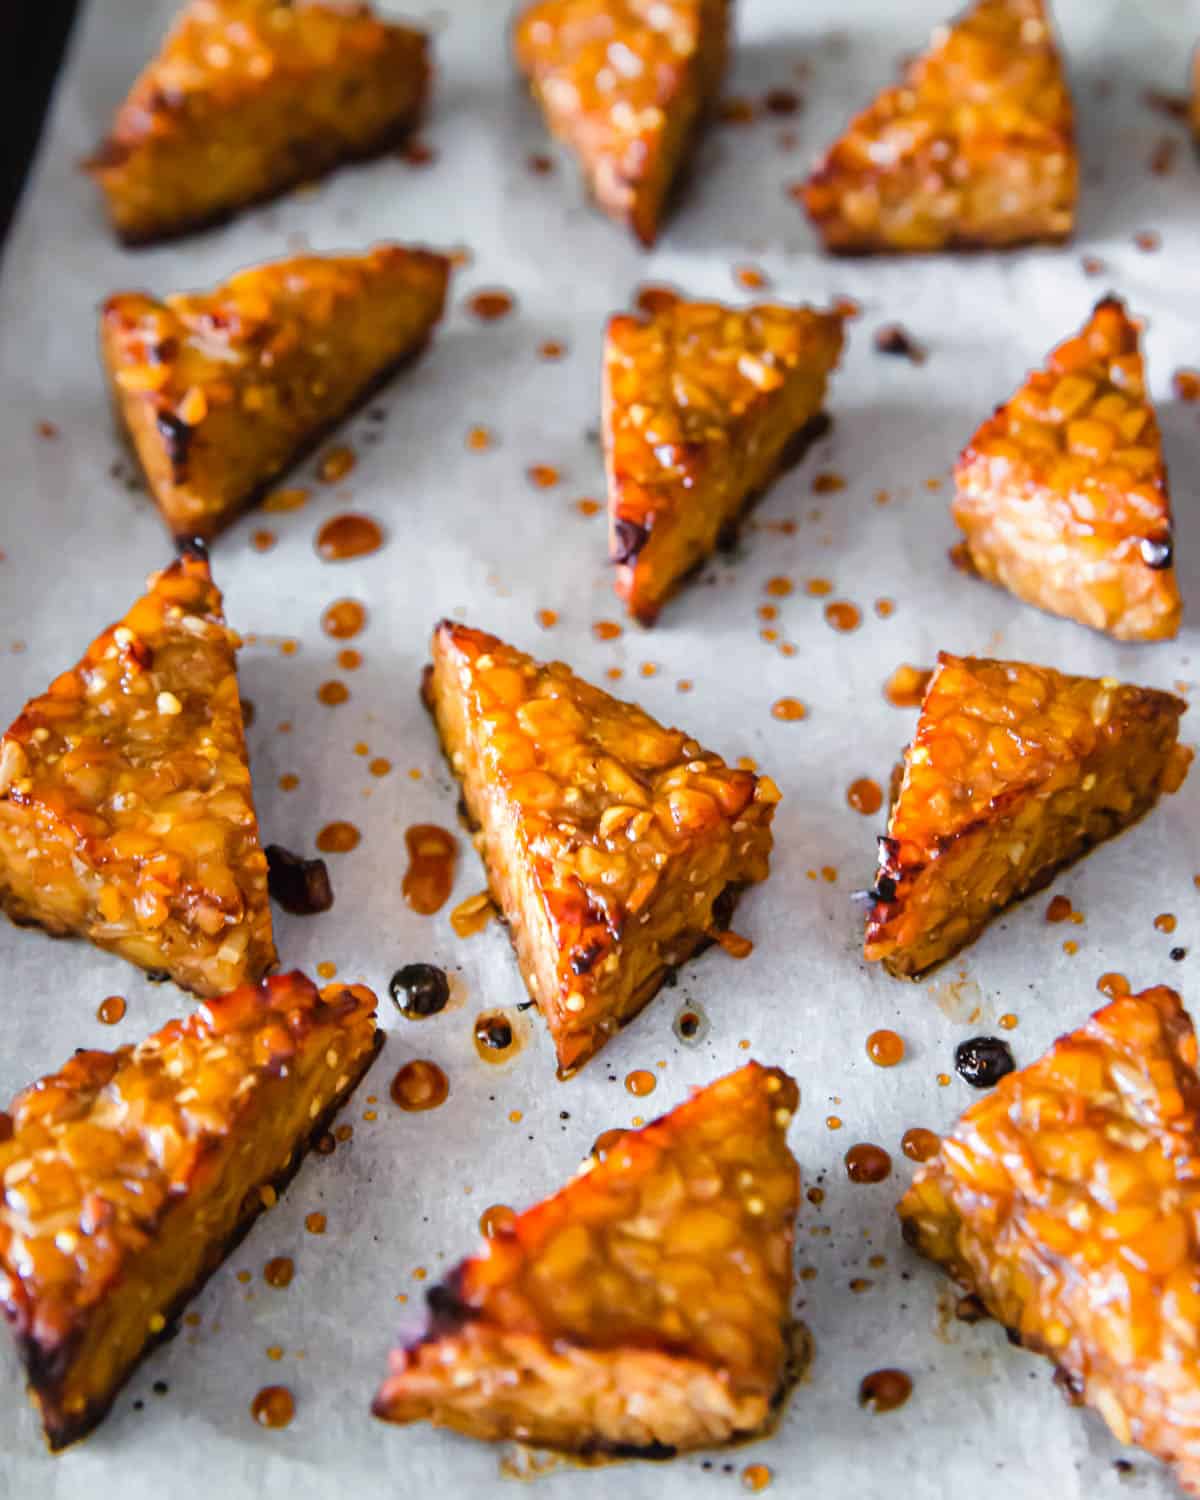 Marinated tempeh is oven baked until crispy golden edges and the perfect vegan based meal.